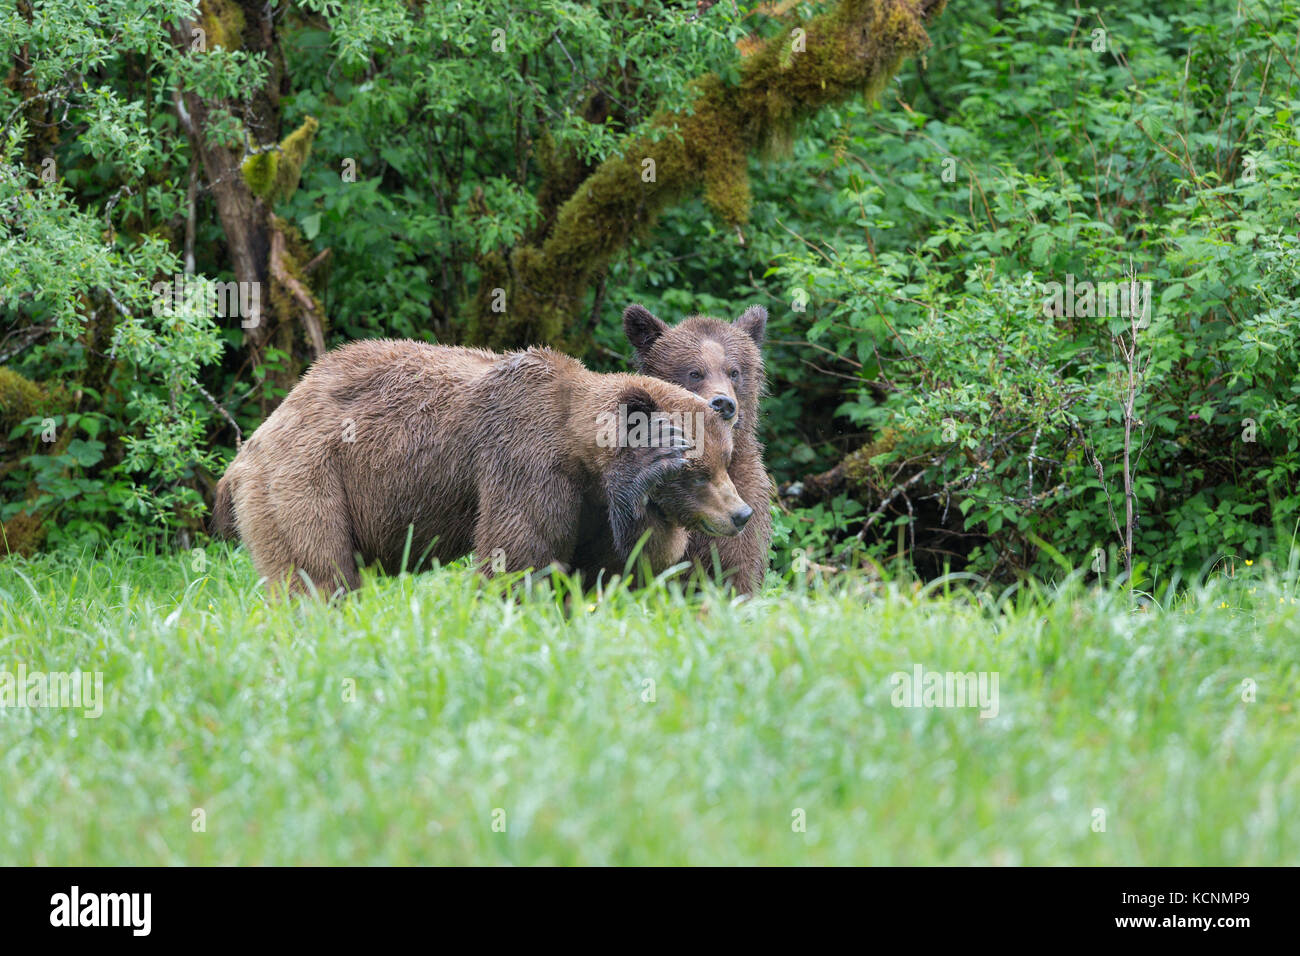 Grizzly bear (Ursus arctos horribilis), young male left) and female courting, Khutzeymateen Inlet, Khutzeymateen Grizzly Bear Sanctuary, British Columbia, Canada. Stock Photo